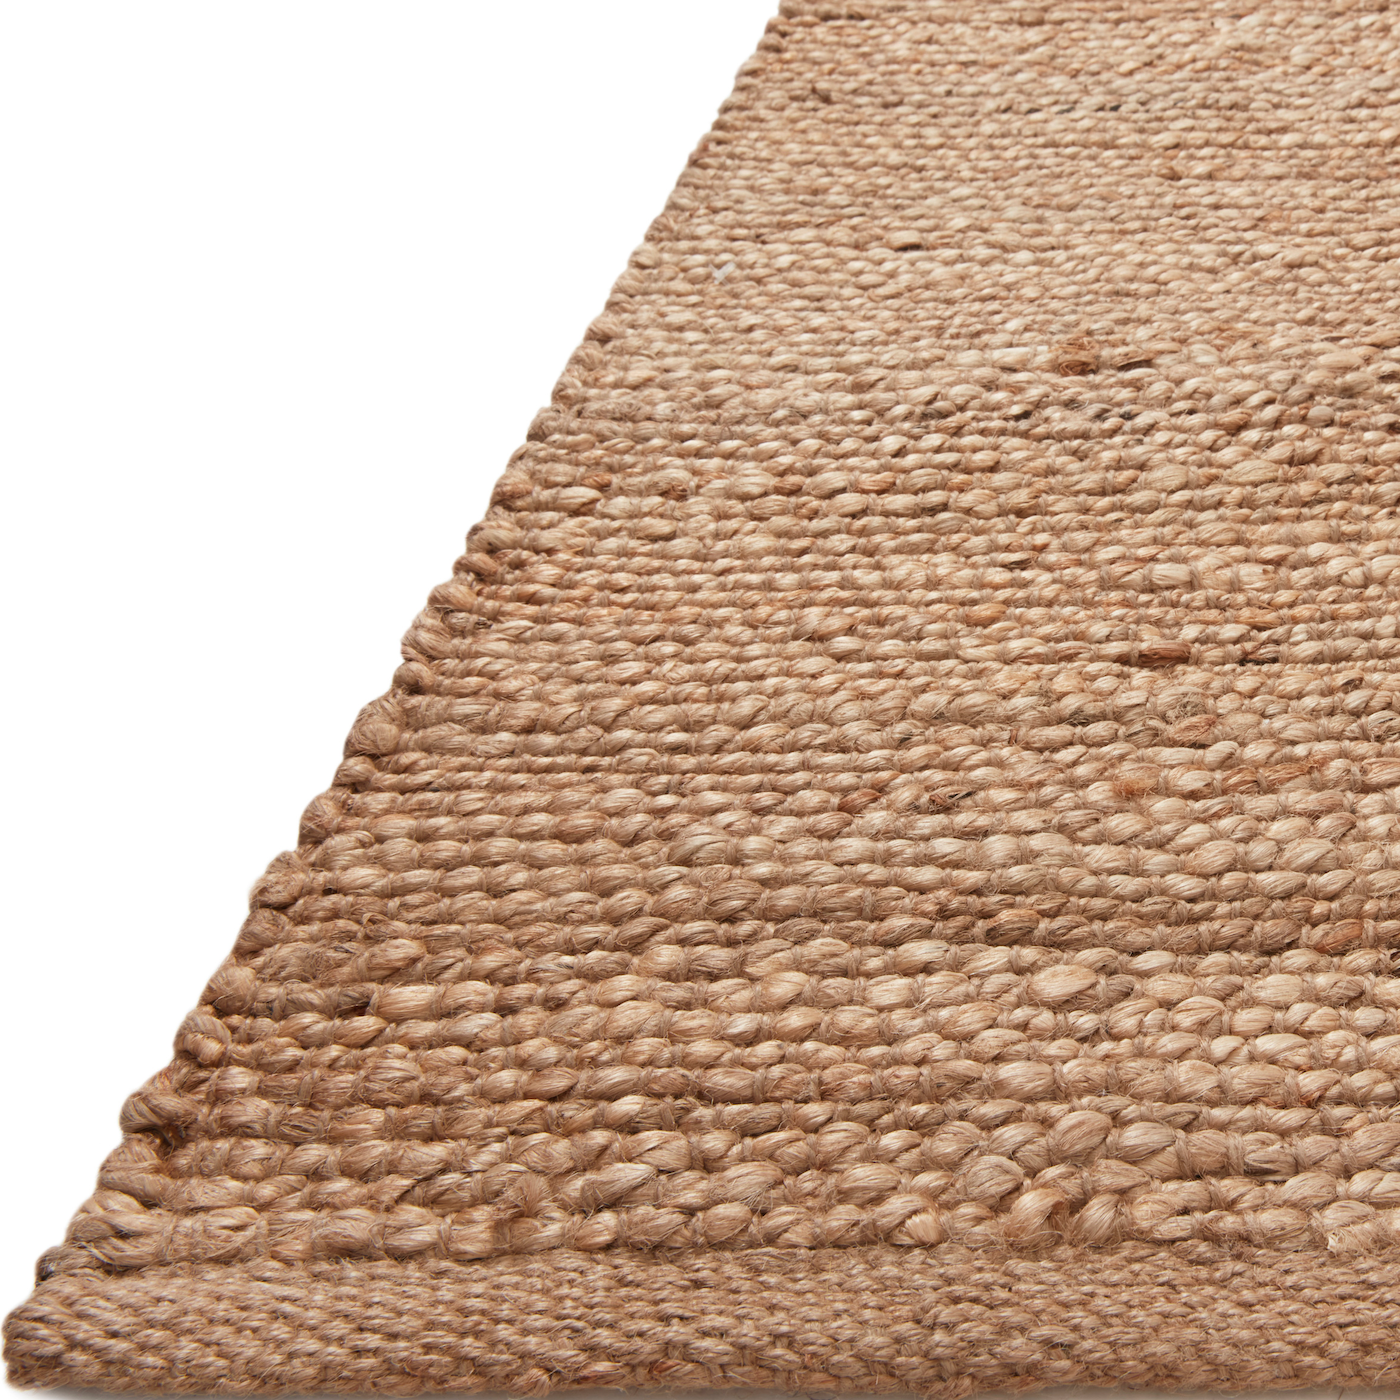 A tonal approach to Moroccan-inspired rugs, the Bodhi Natural / Natural BOD-05 rug from Loloi is hand-woven of 100% jute. This rug features linear and braided details, creating natural variations that make a subtle yet striking statement for an entryway, living room, hallway or kitchen runner, or dining room. Amethyst Home provides interior design, new construction, custom furniture, and rugs for the Kansas City metro area.